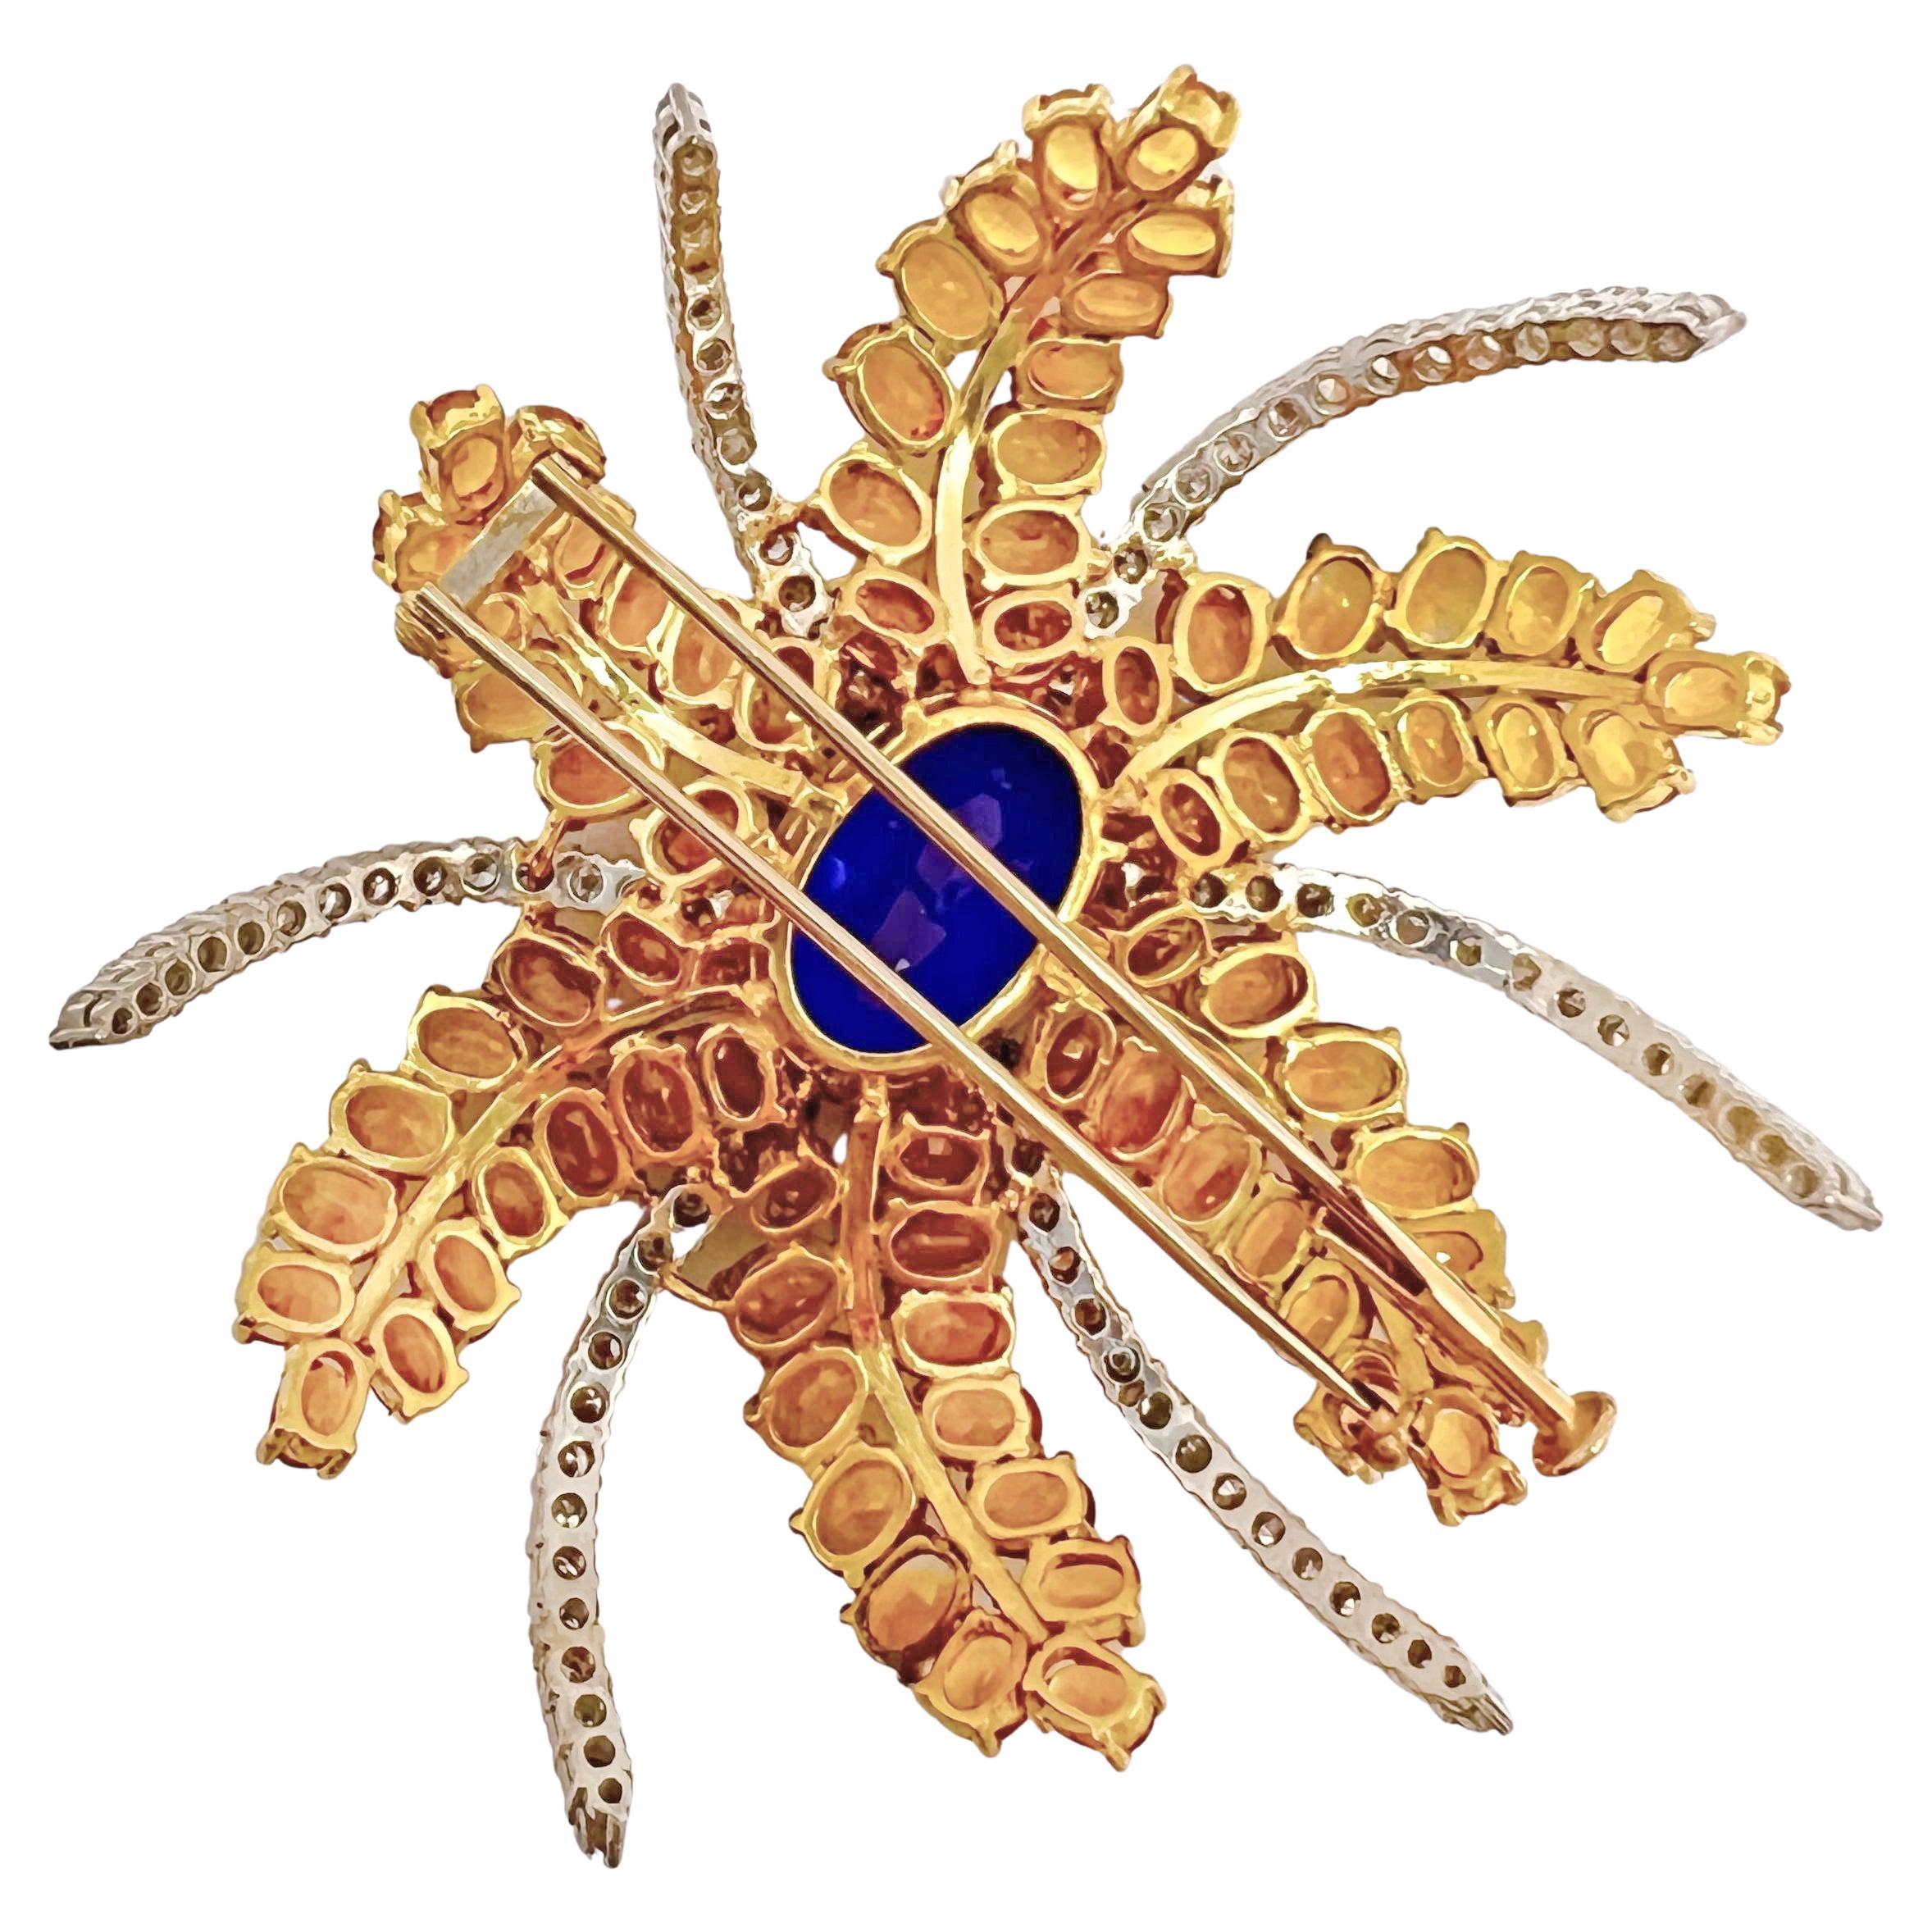 Gem-set stylized fireworks brooch, centering a larger oval-shaped tanzanite with six double-rows of oval-shaped yellow sapphires and five rows of round diamonds radiating outwards. Handmade in 18k yellow and white gold and measuring 2.75